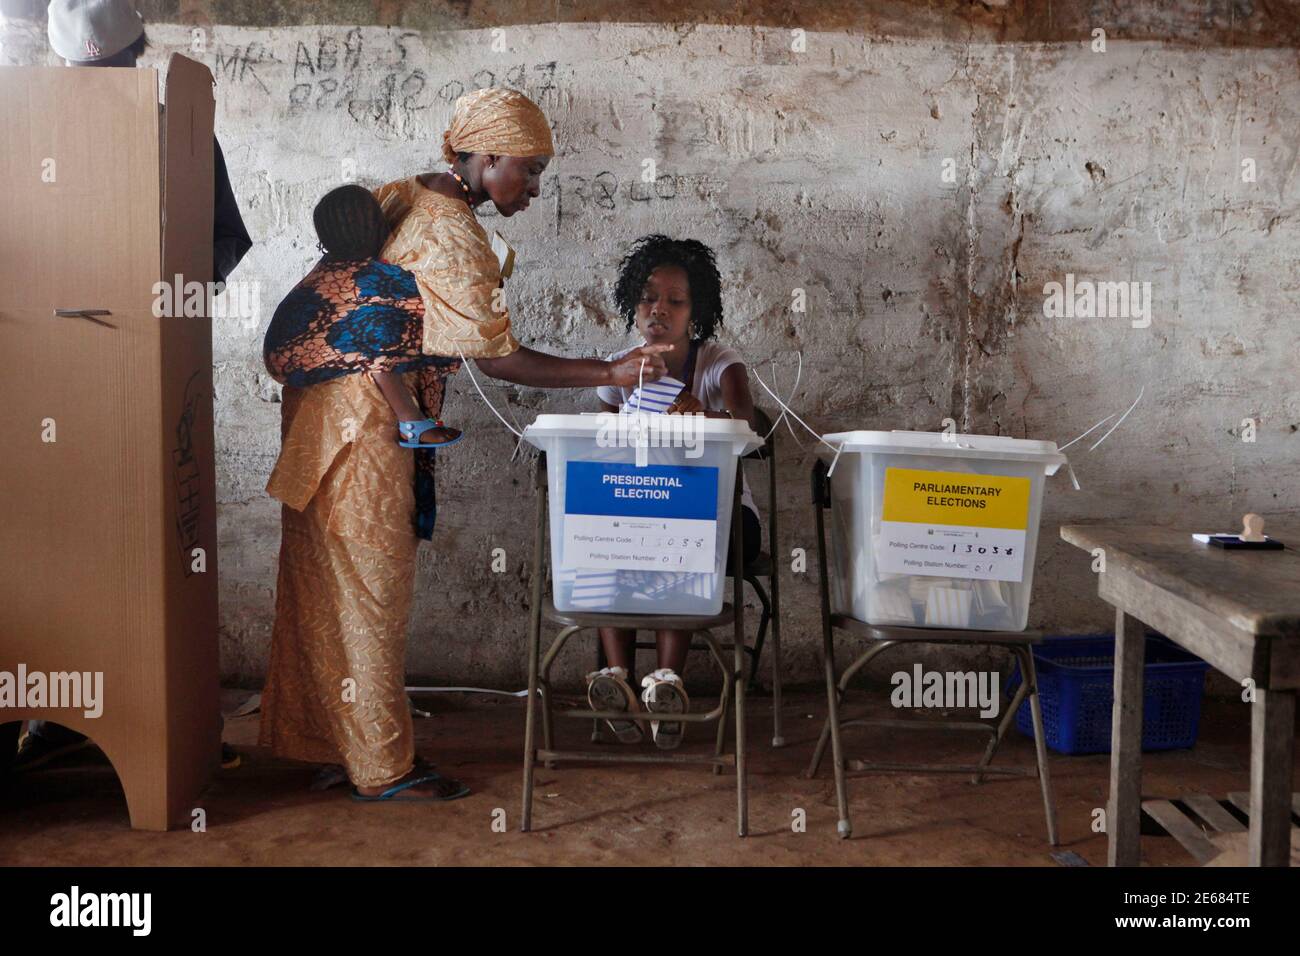 A woman carrying a baby on her back votes during presidential elections in  Freetown November 17, 2012. Sierra Leoneans vote on Saturday in elections  they hope can propel the small West African